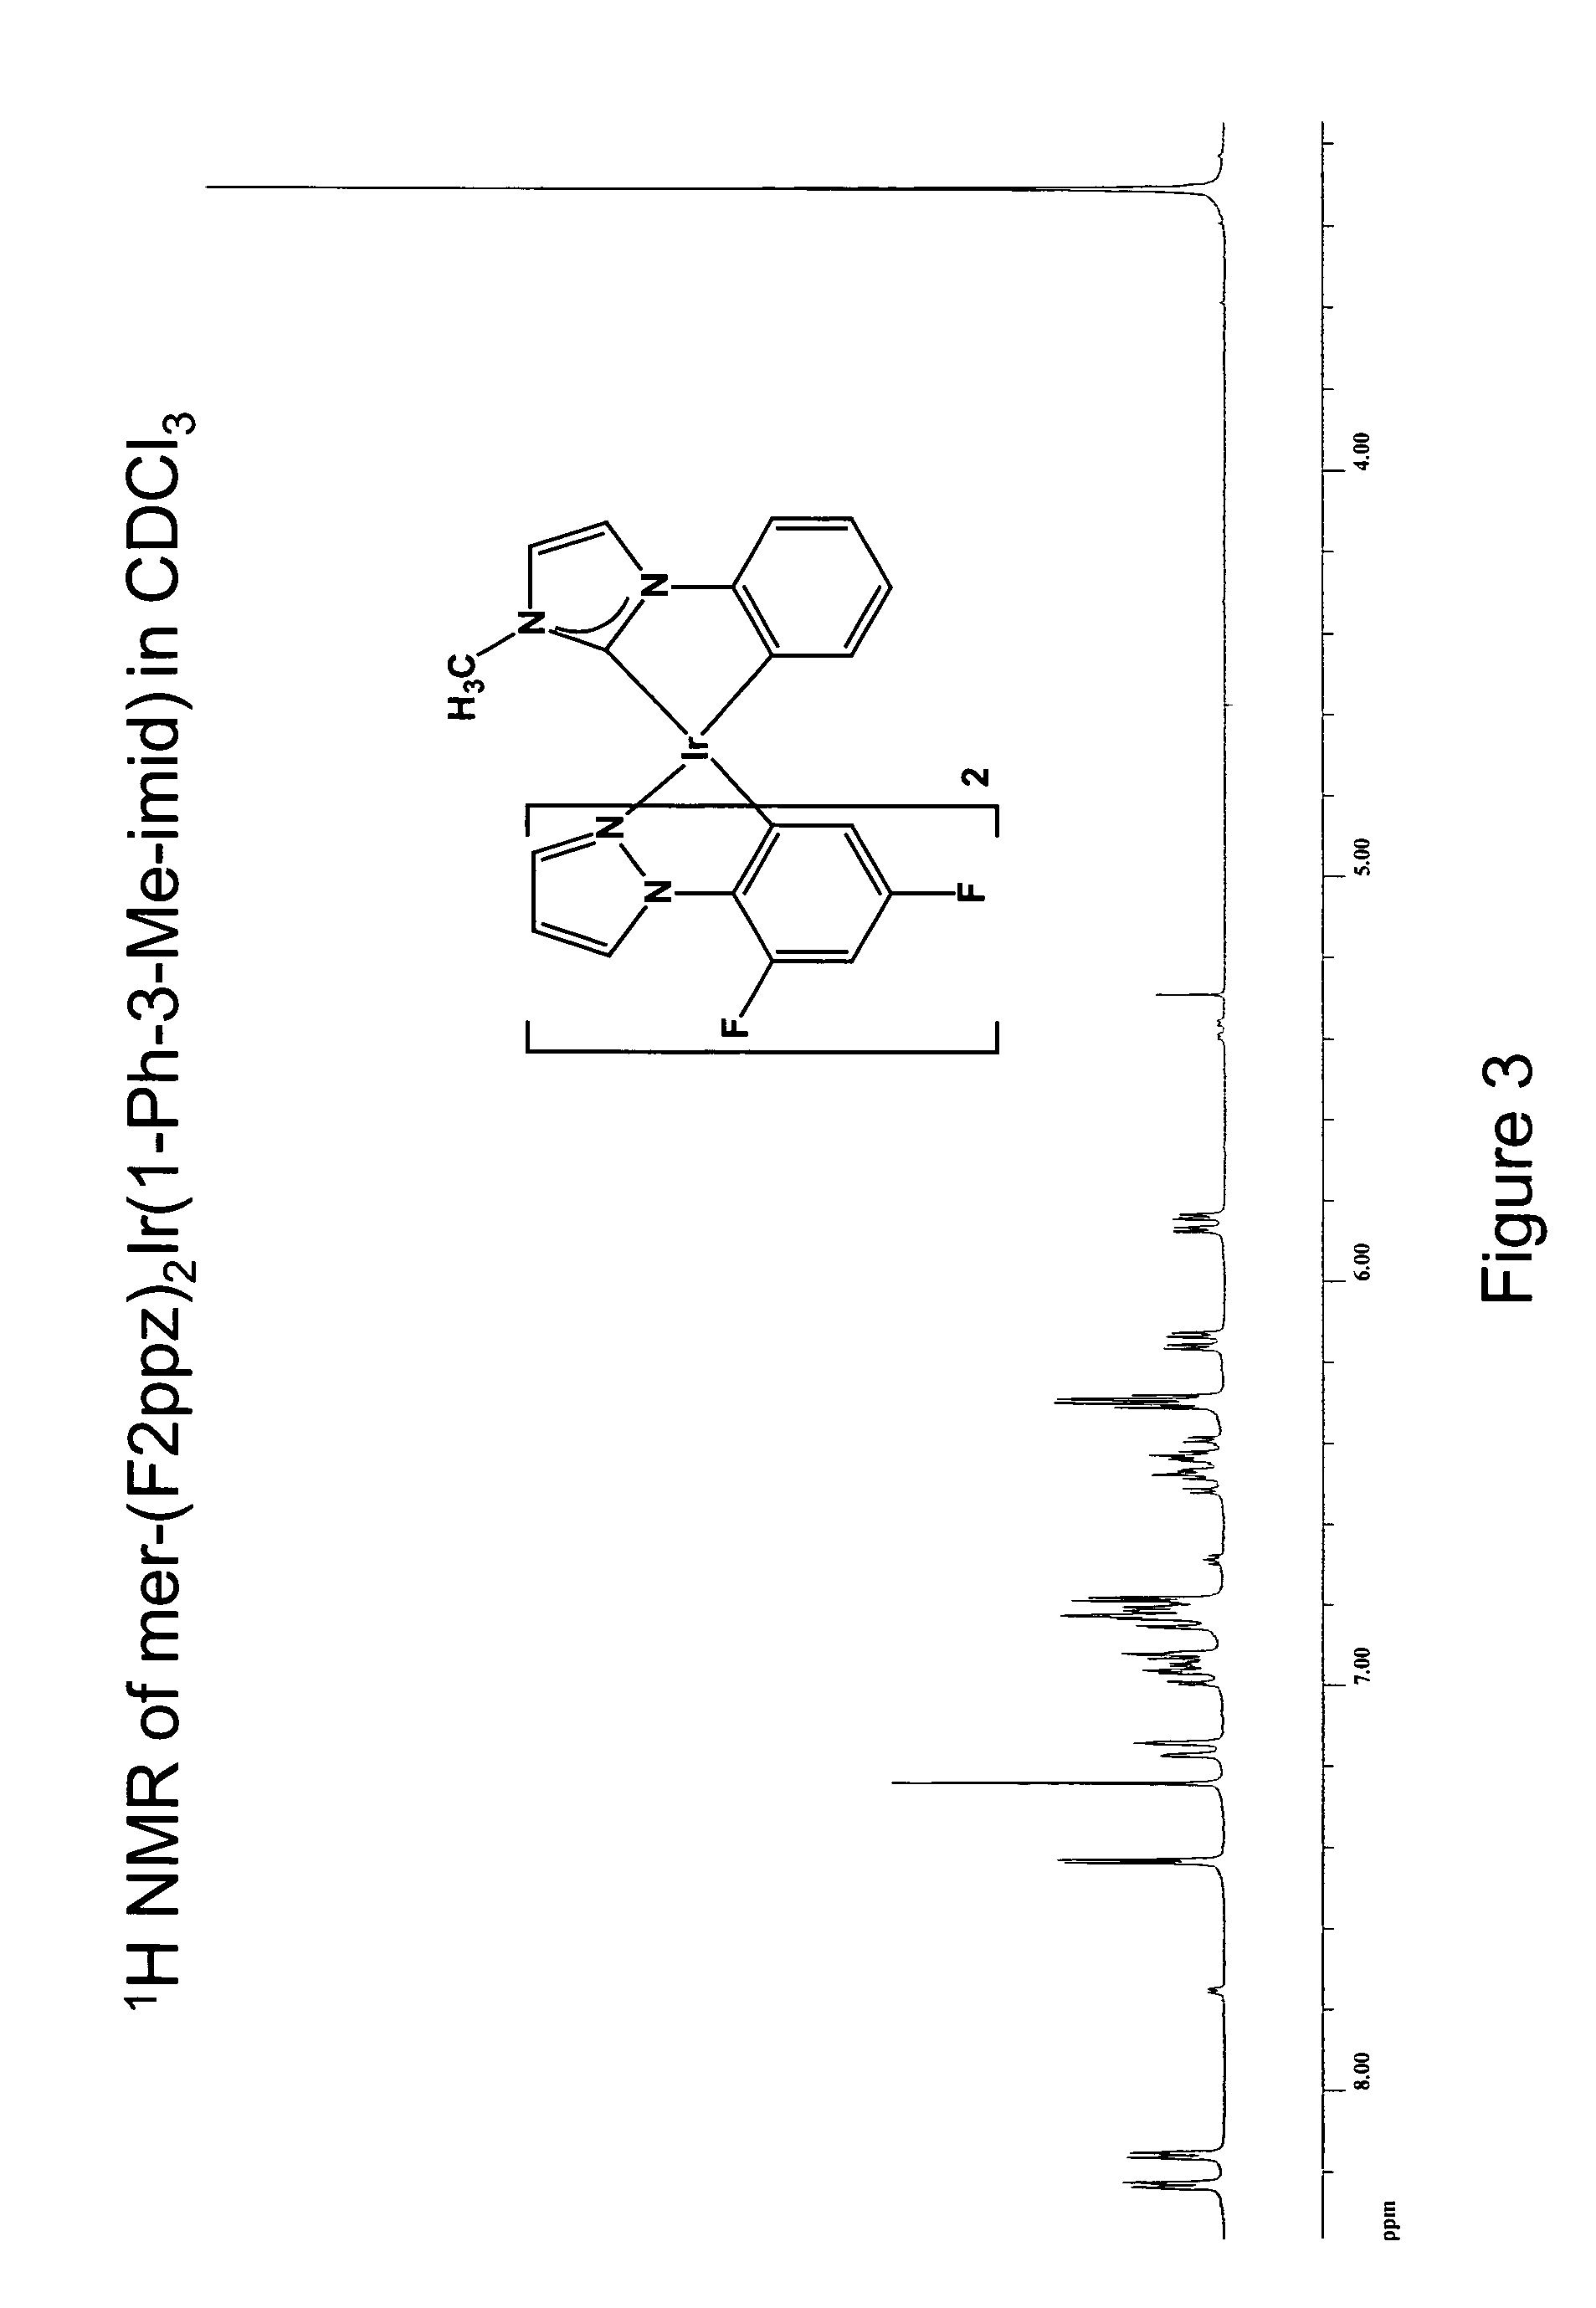 Luminescent compounds with carbene ligands